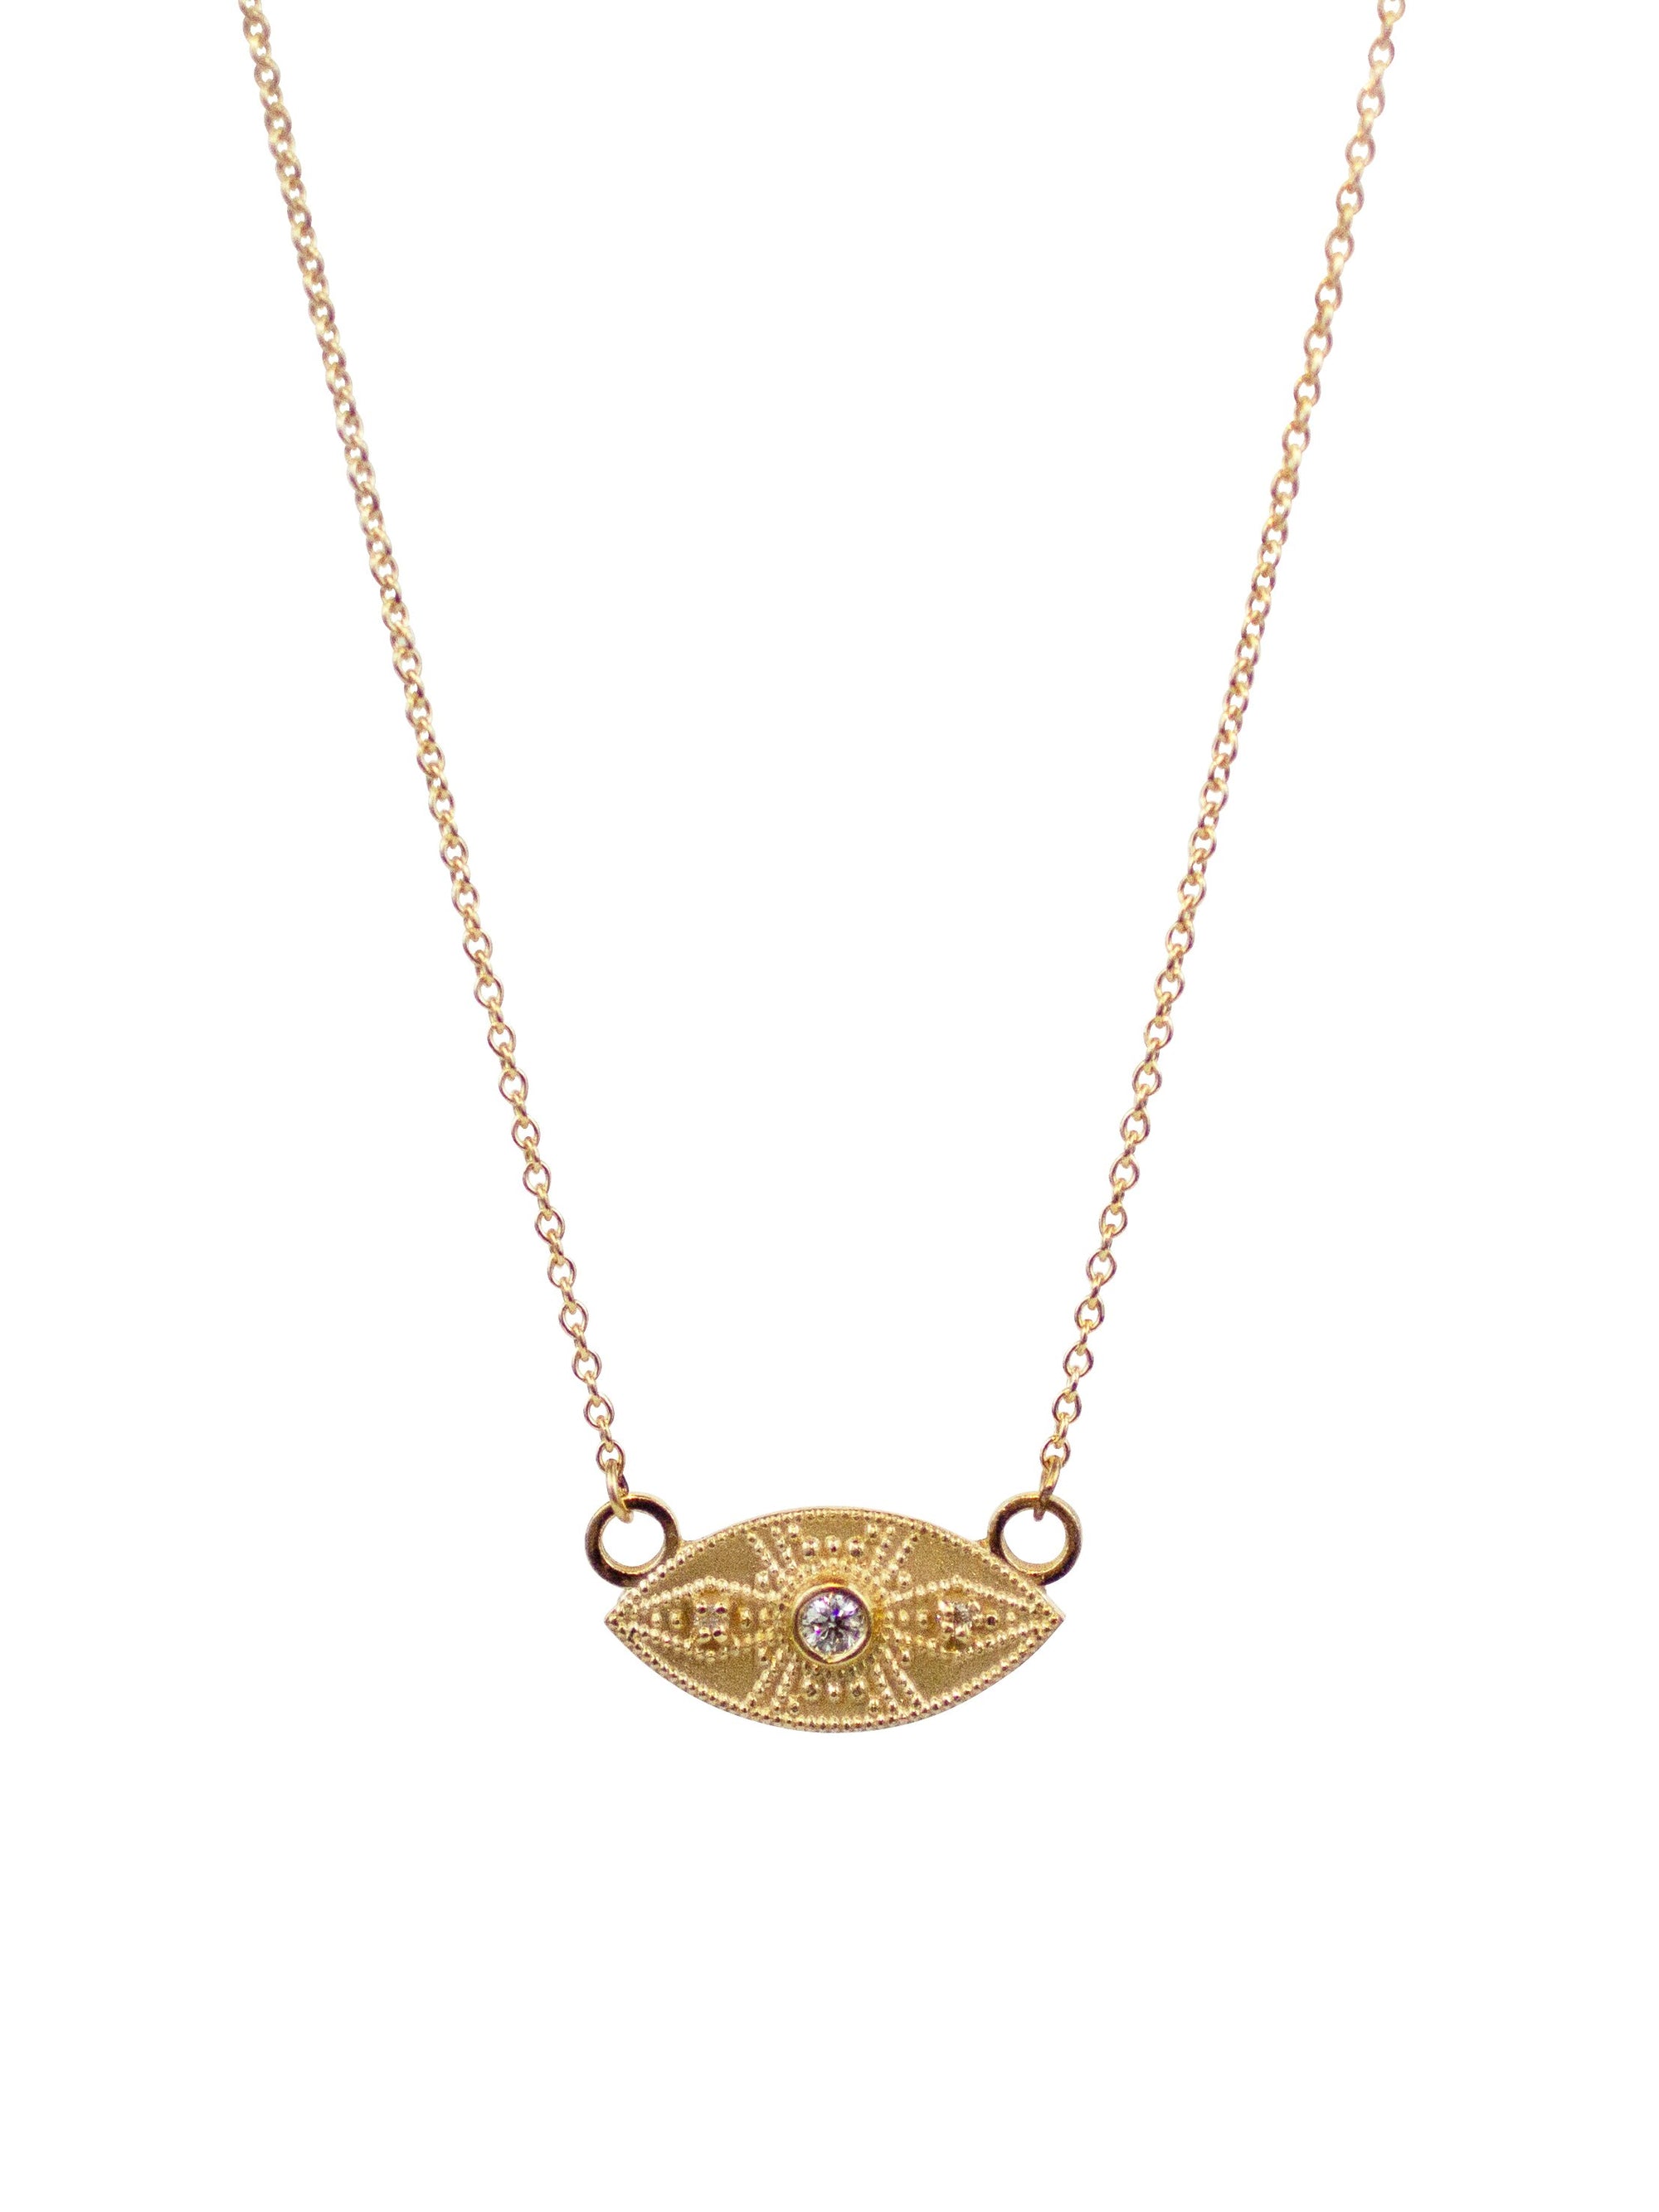 14K Ajna Necklace "ignite your inner voice"